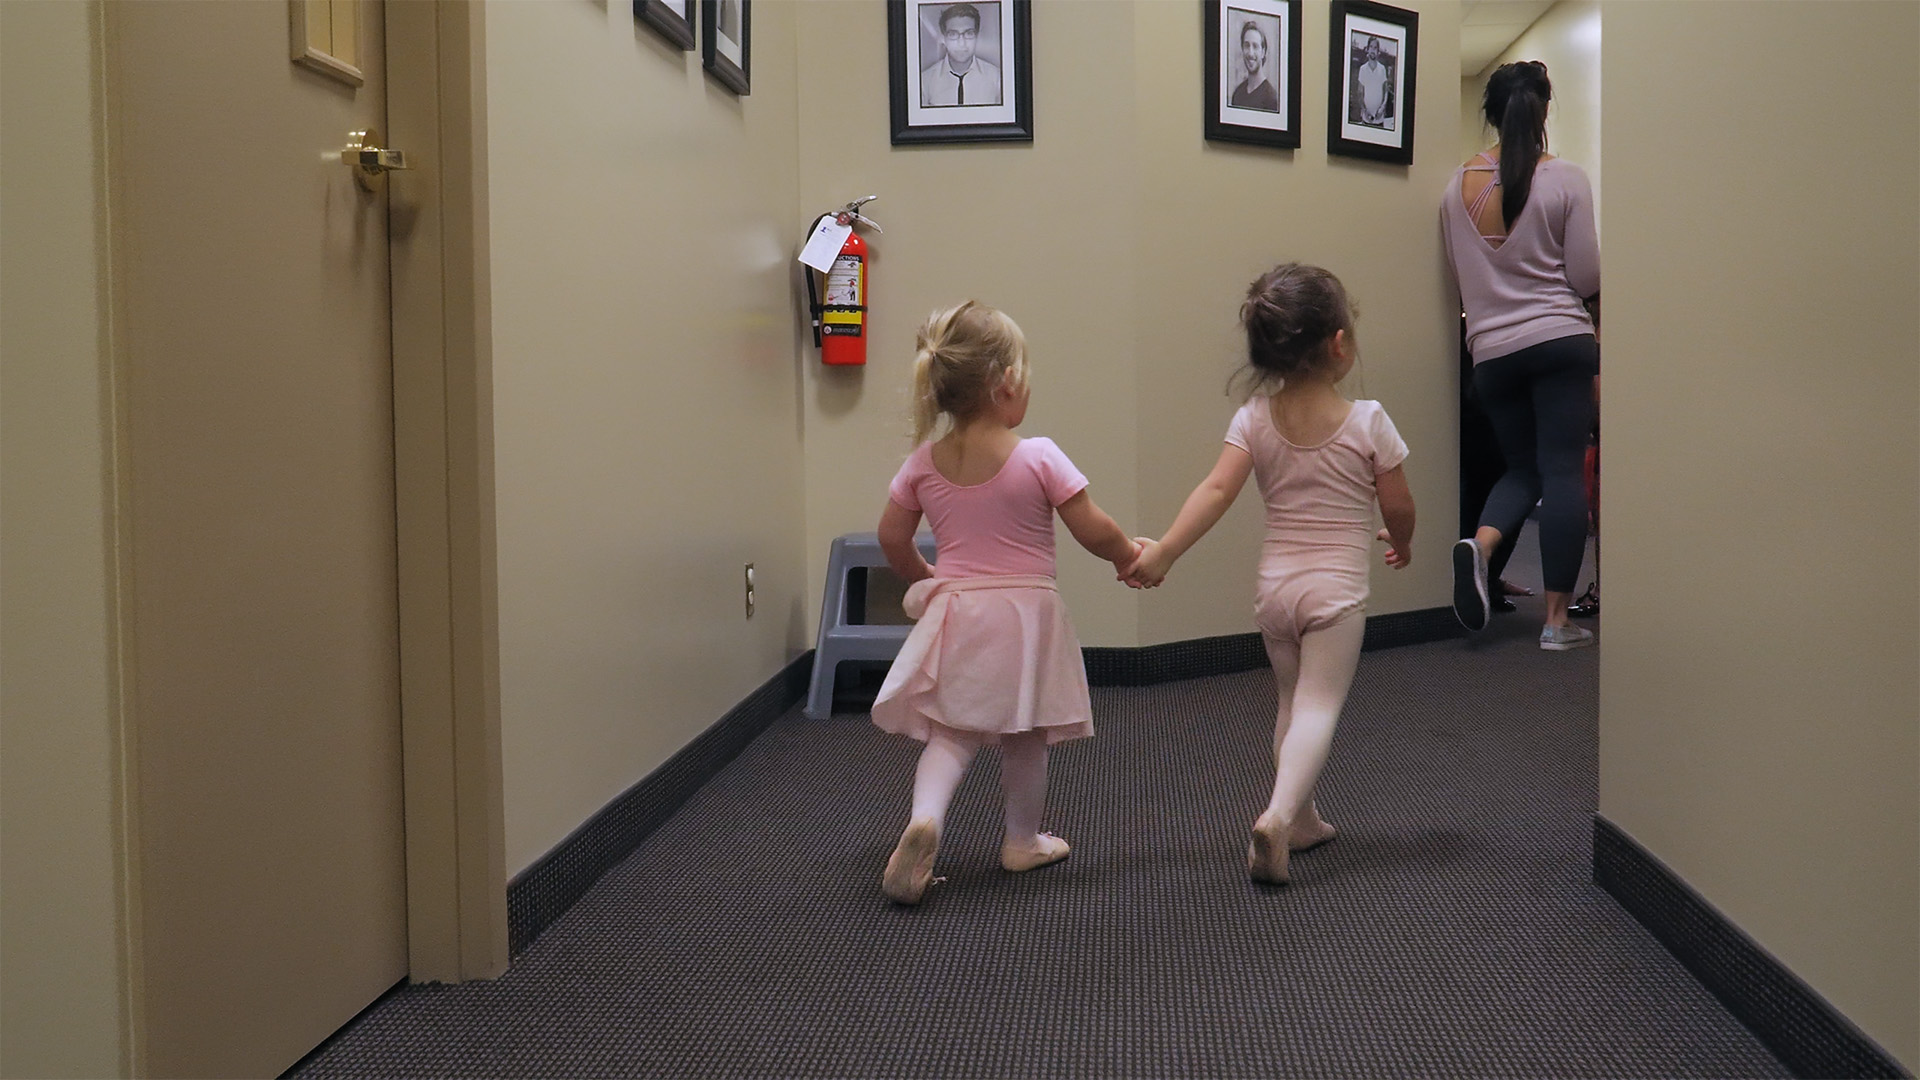 oakville academy for the arts dance lessons music lessons art lessons kids